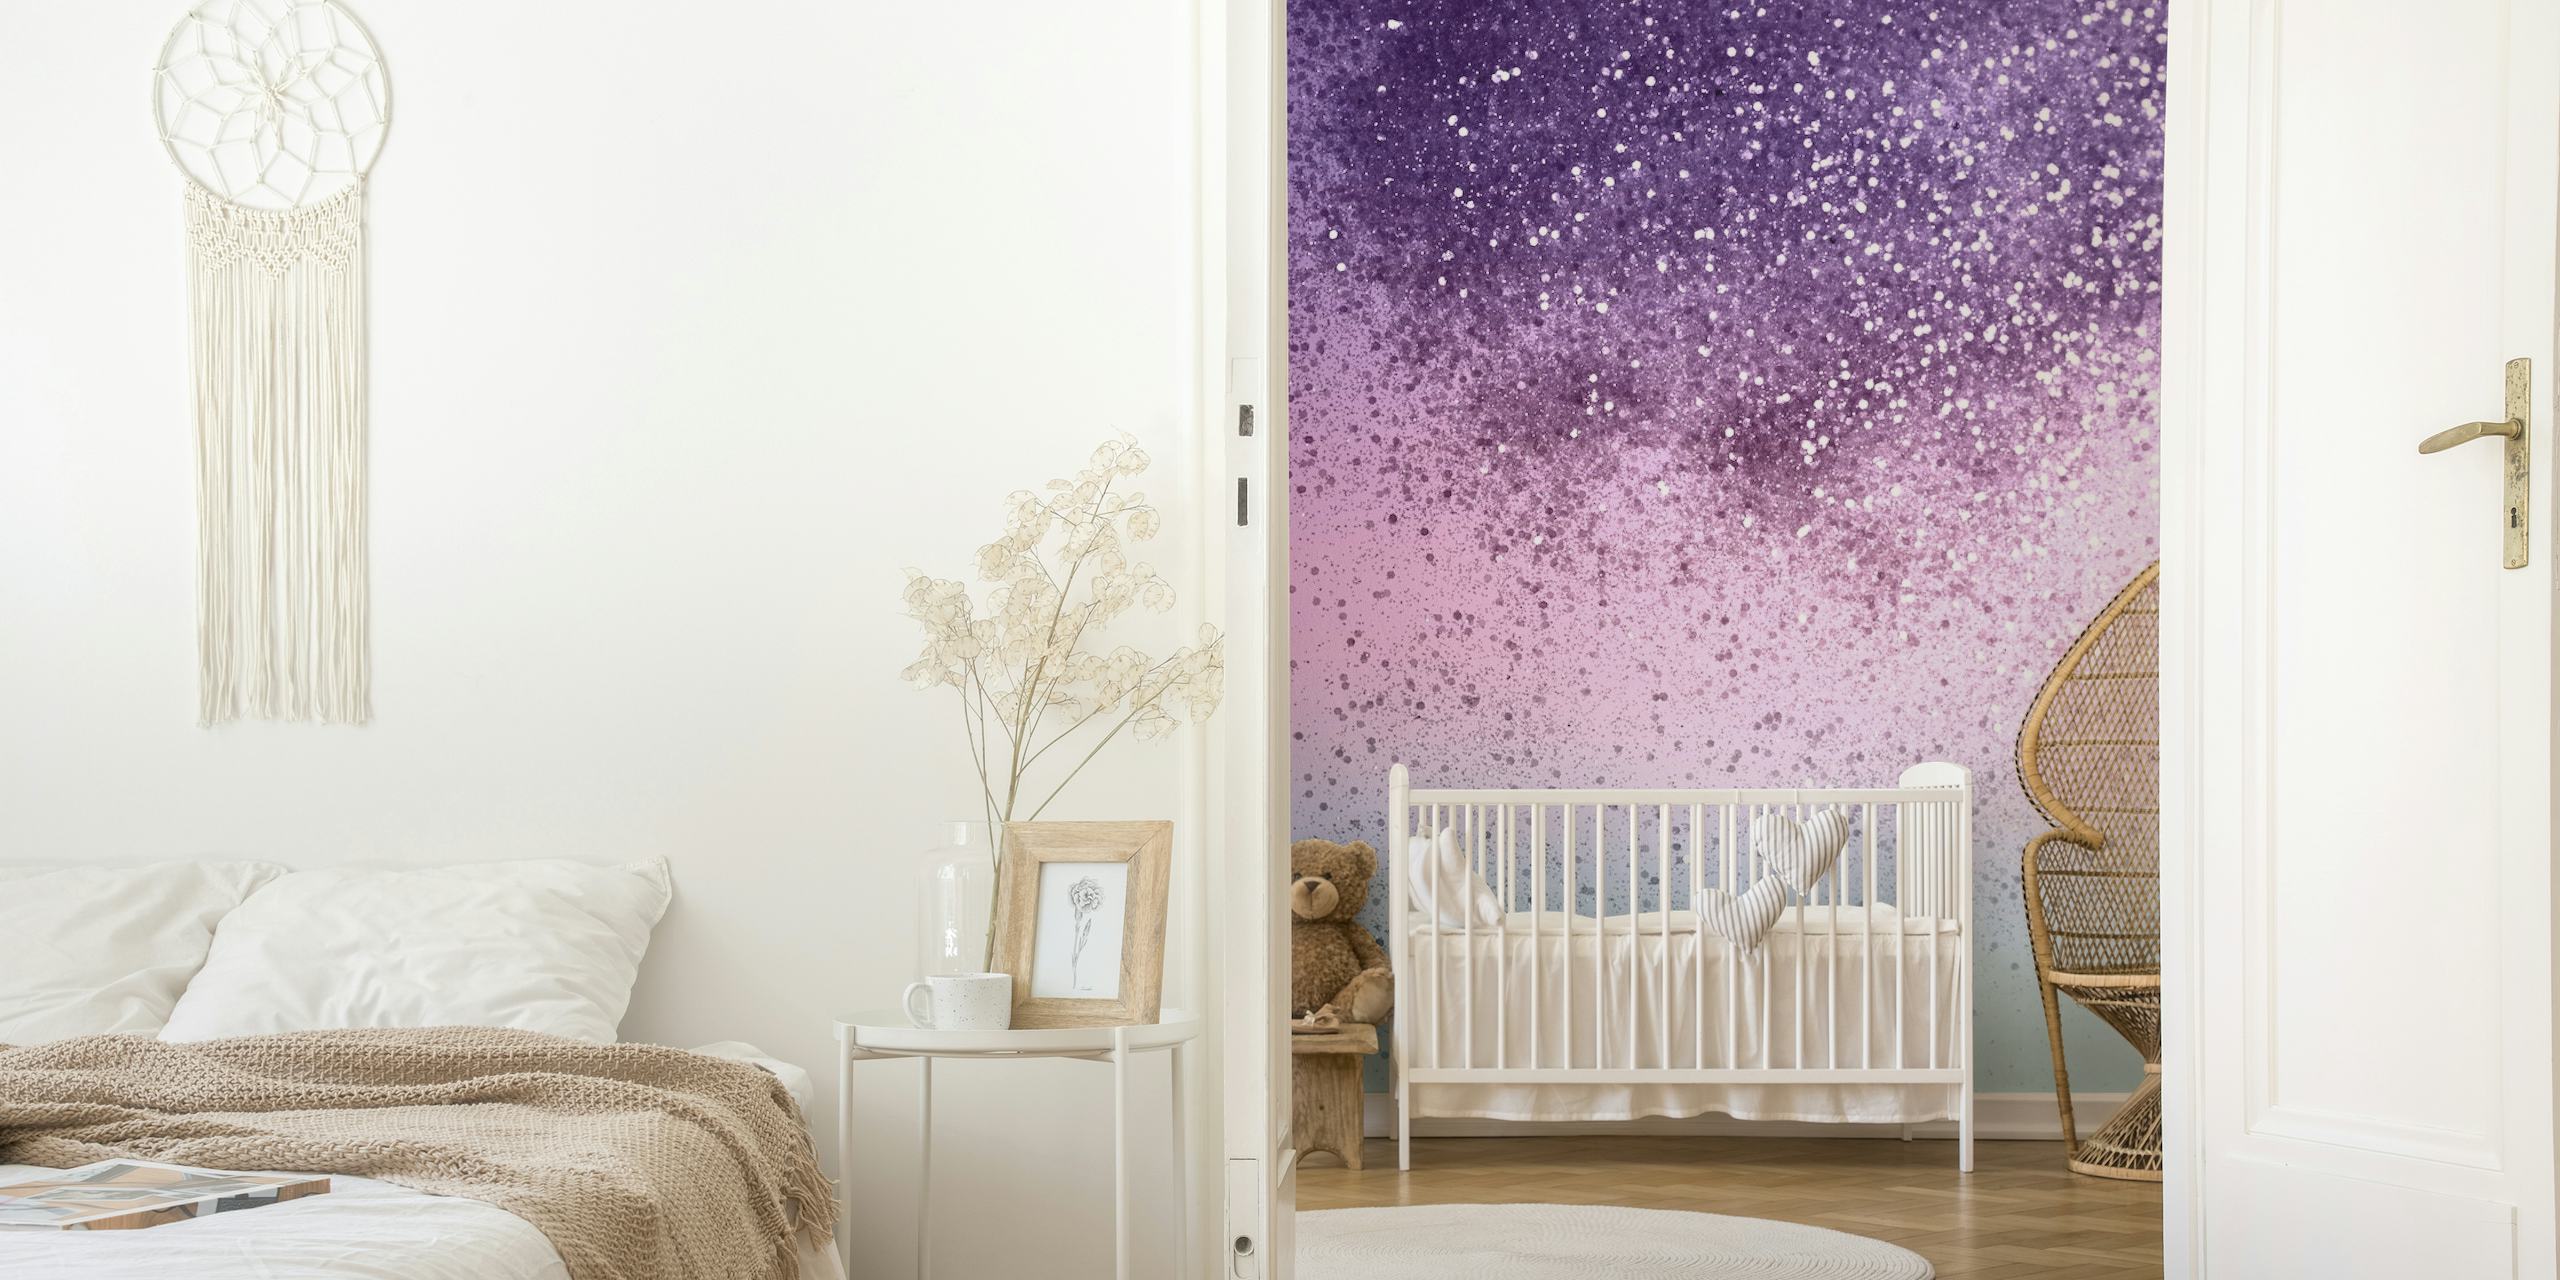 Pastel gradient wall mural with glitter effect resembling a magical unicorn theme